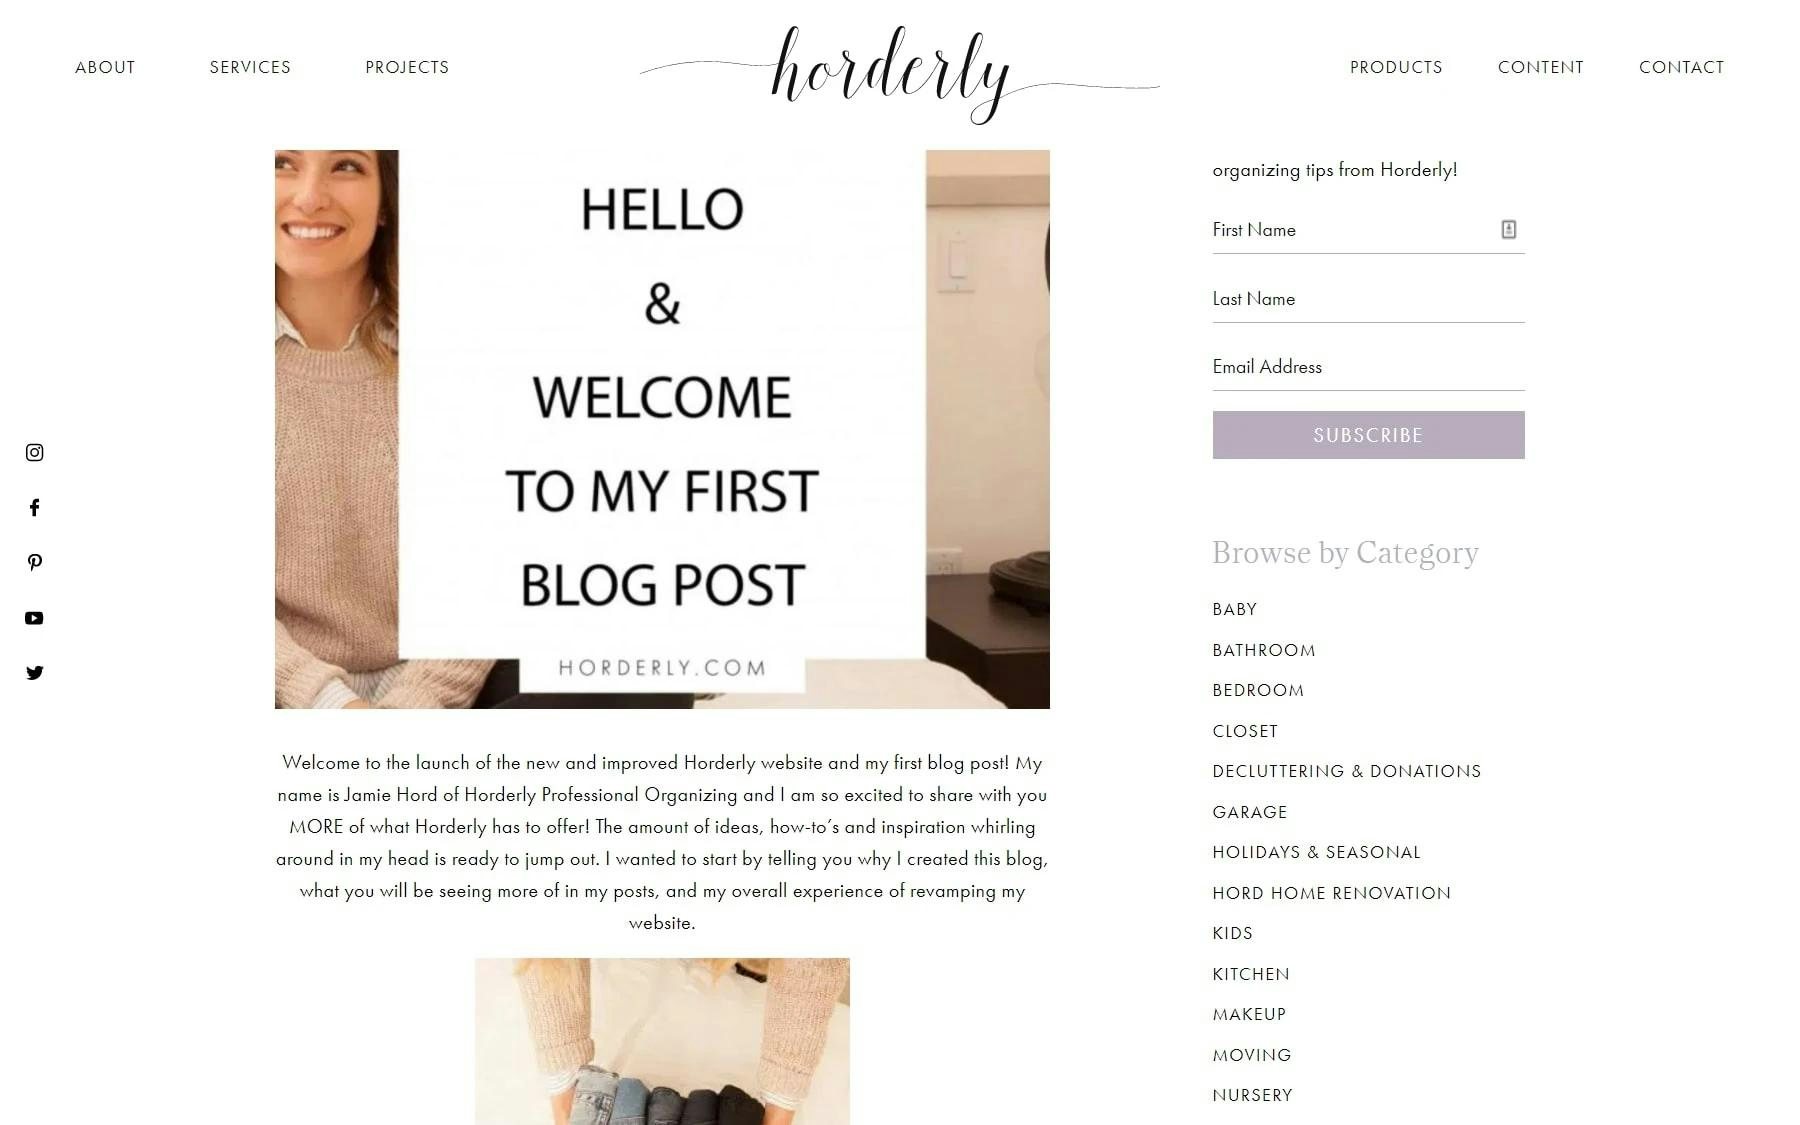 Horderly first blog post